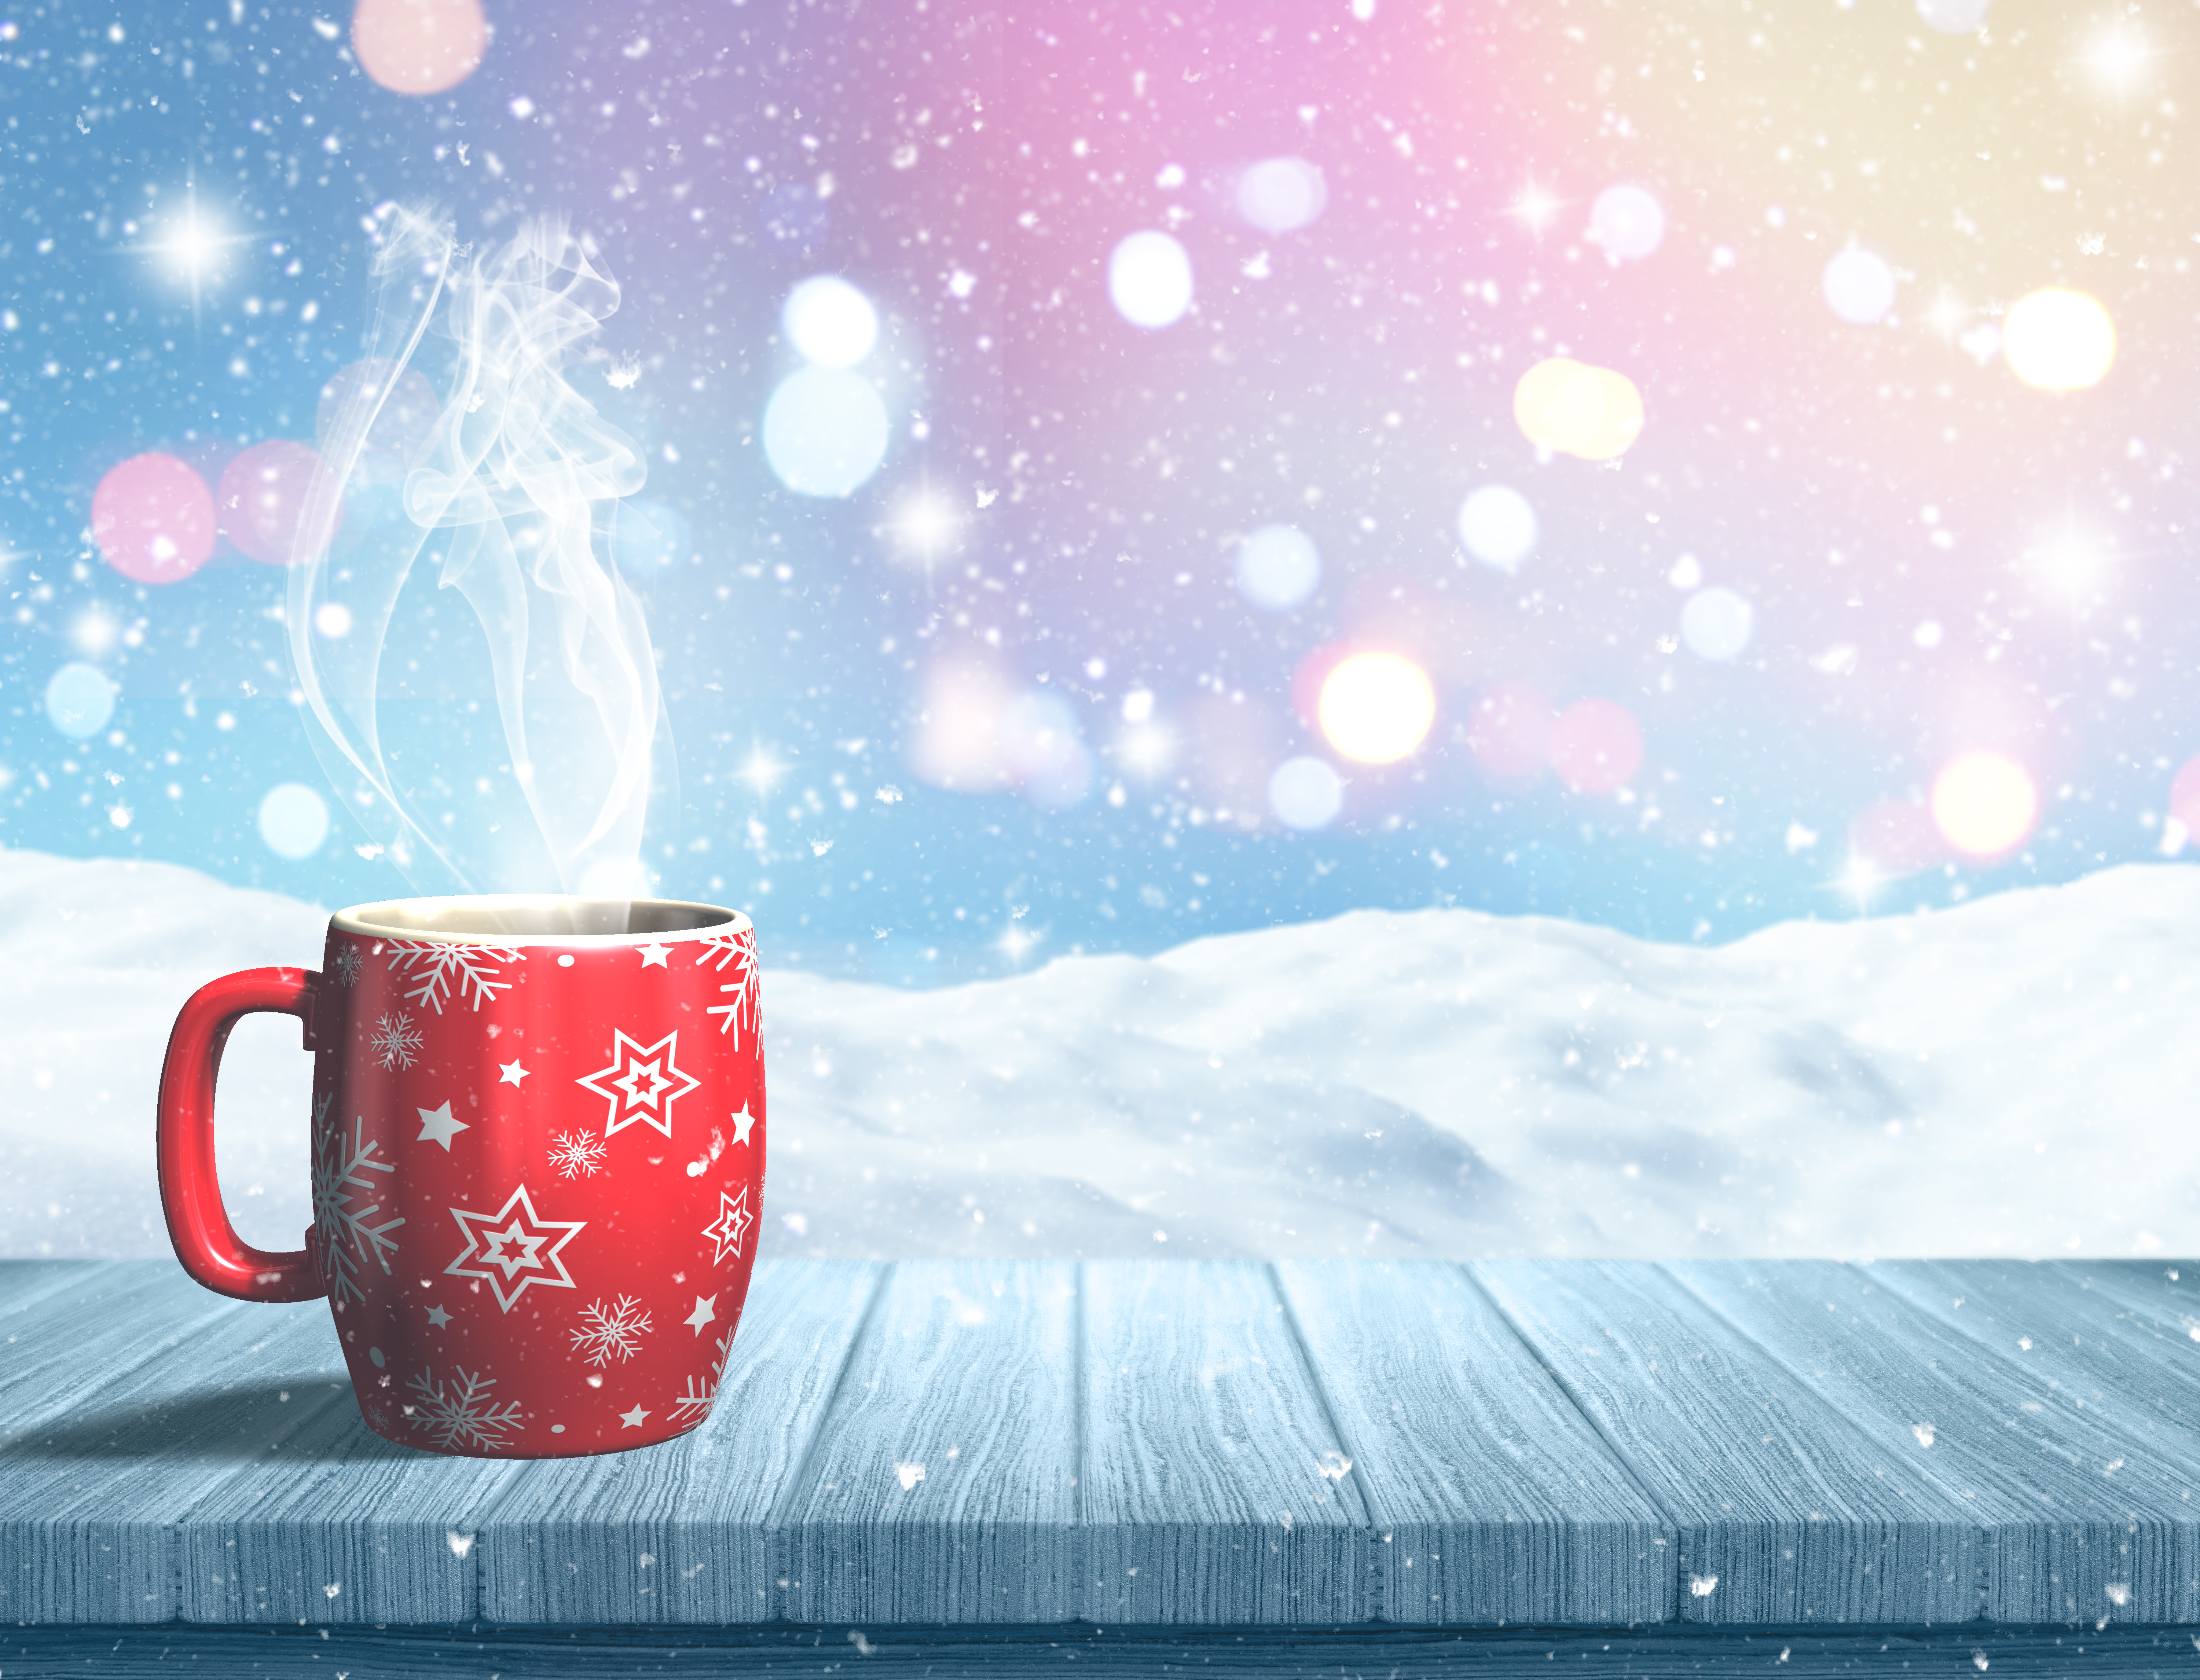 Red mug on a wooden table with colorful background and snowflakes.